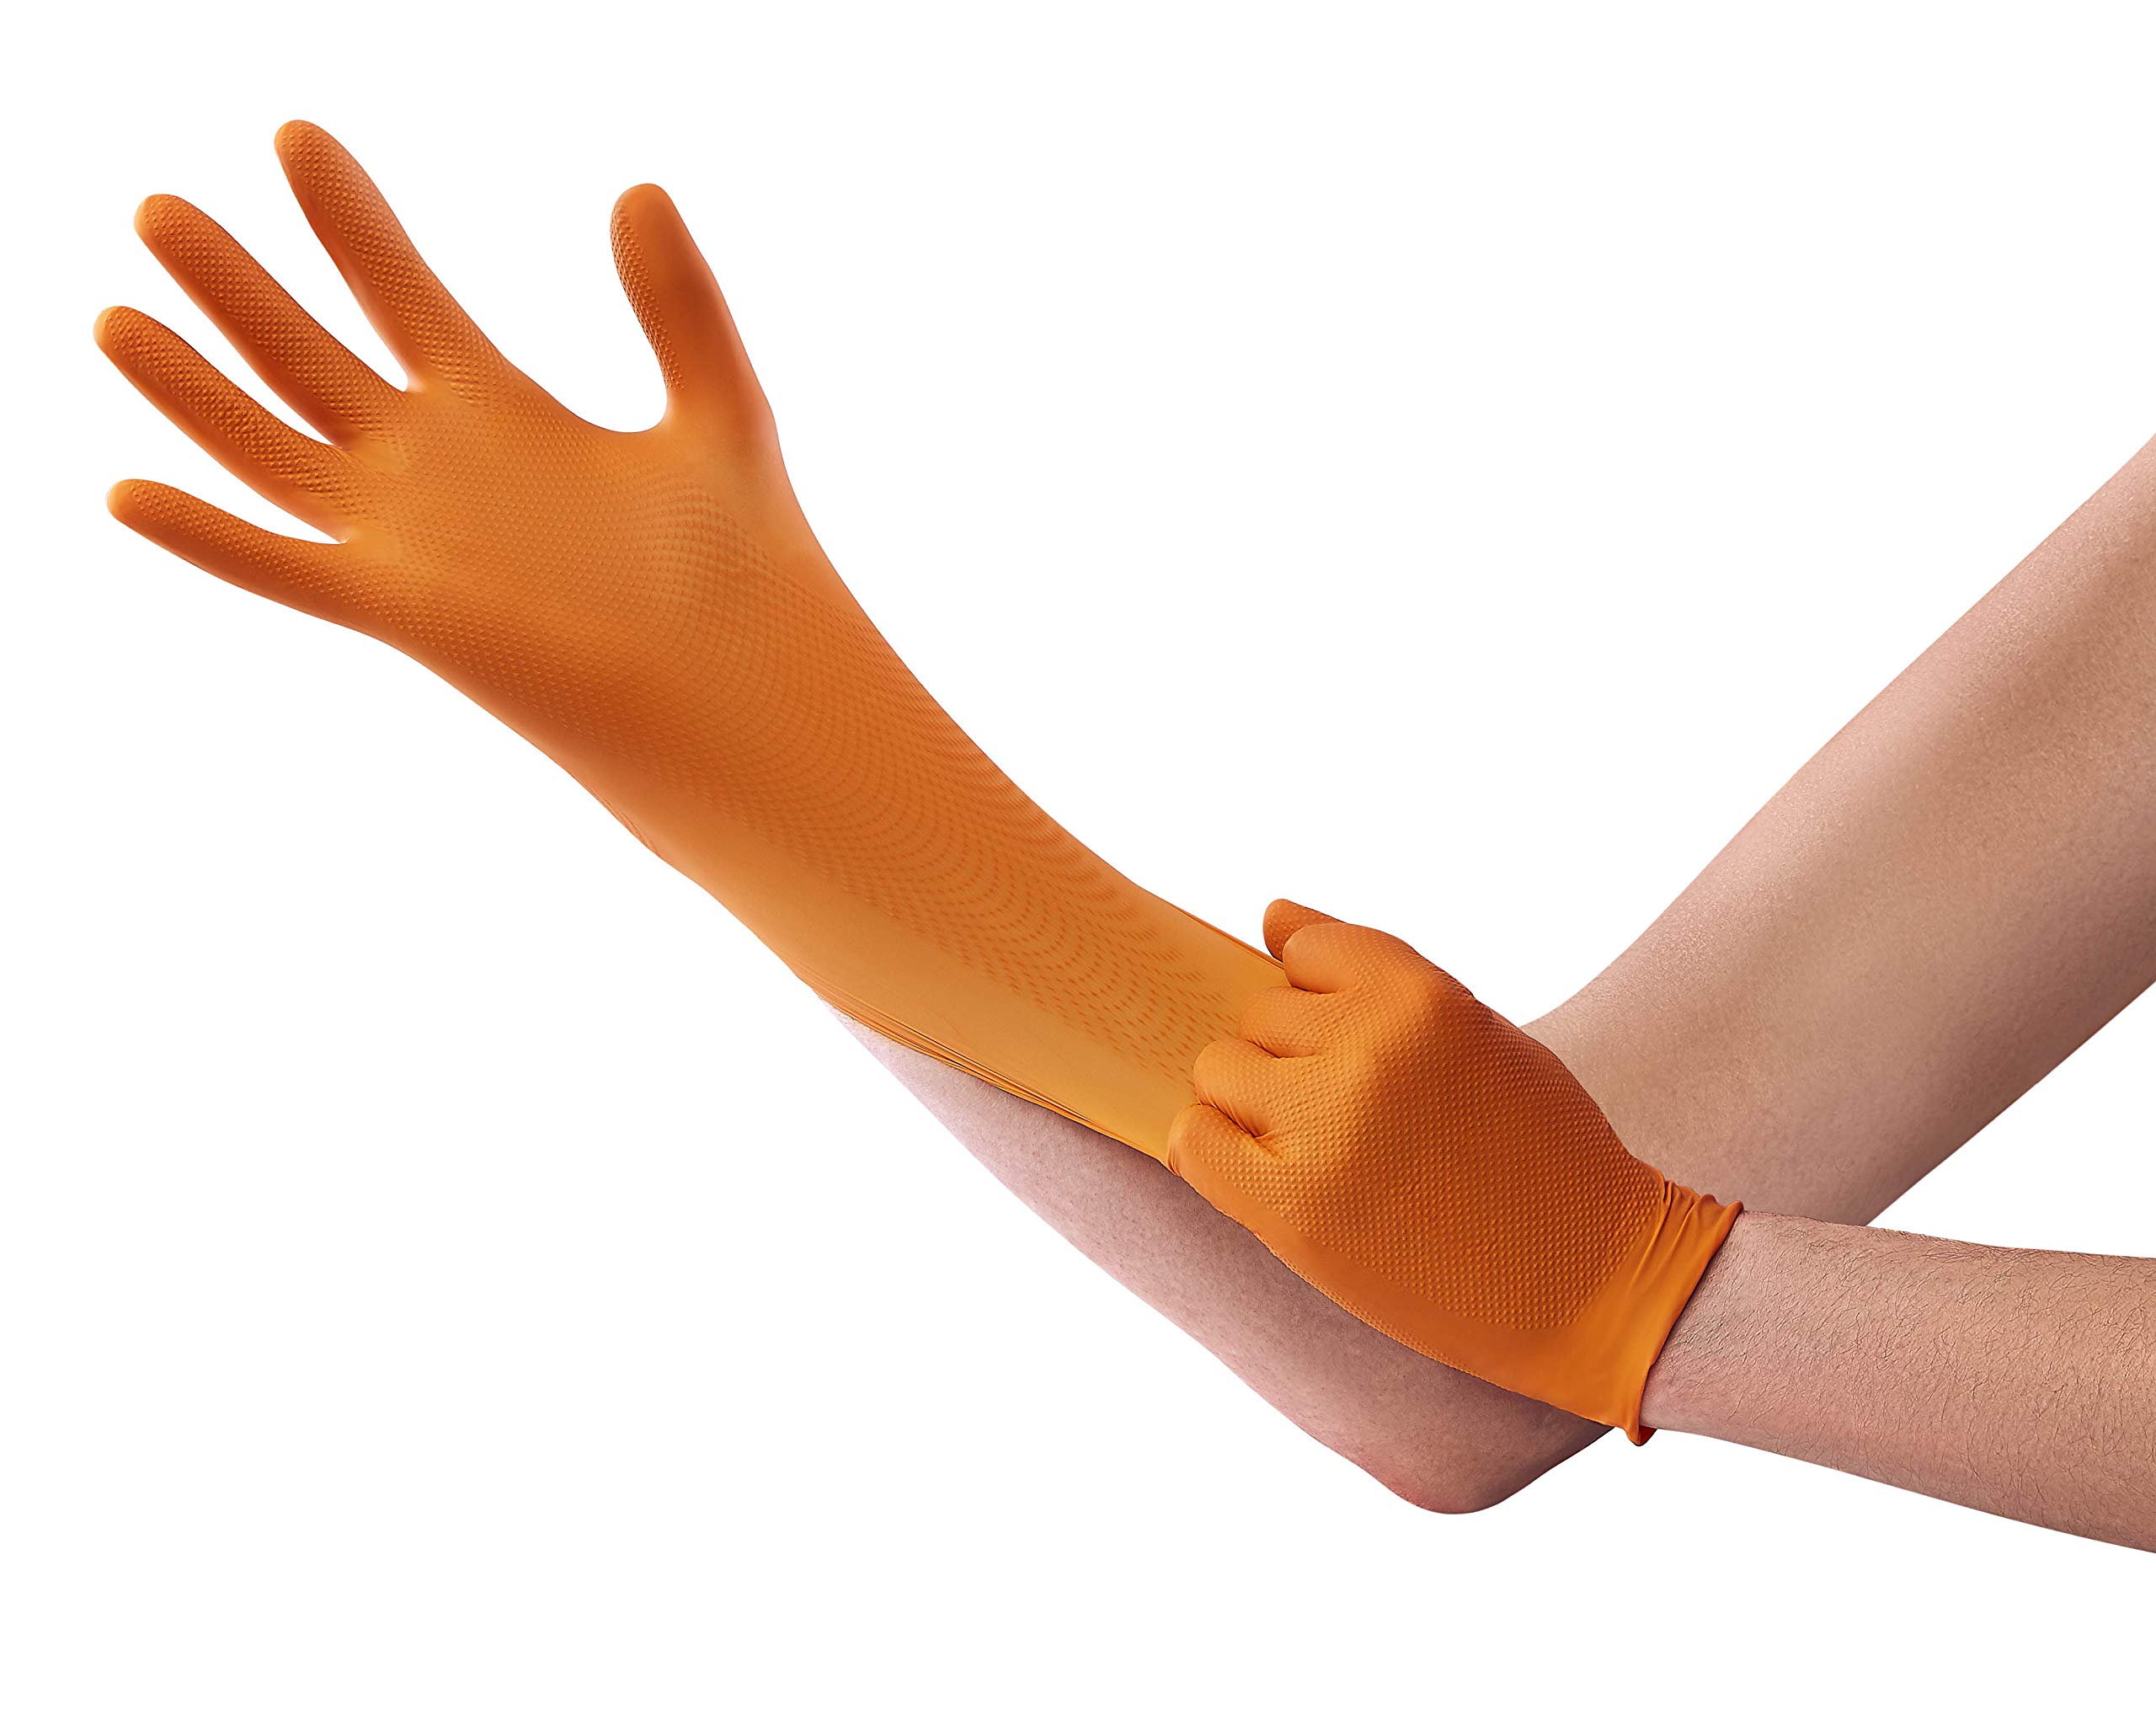 Venom Steel Orange Nitrile Gloves, 8 Mil Thick, 50 Count, Maximum Grip Textured Disposable Gloves, Puncture and Rip Resistant, Hi-Visibility Orange, One Size Fits Most